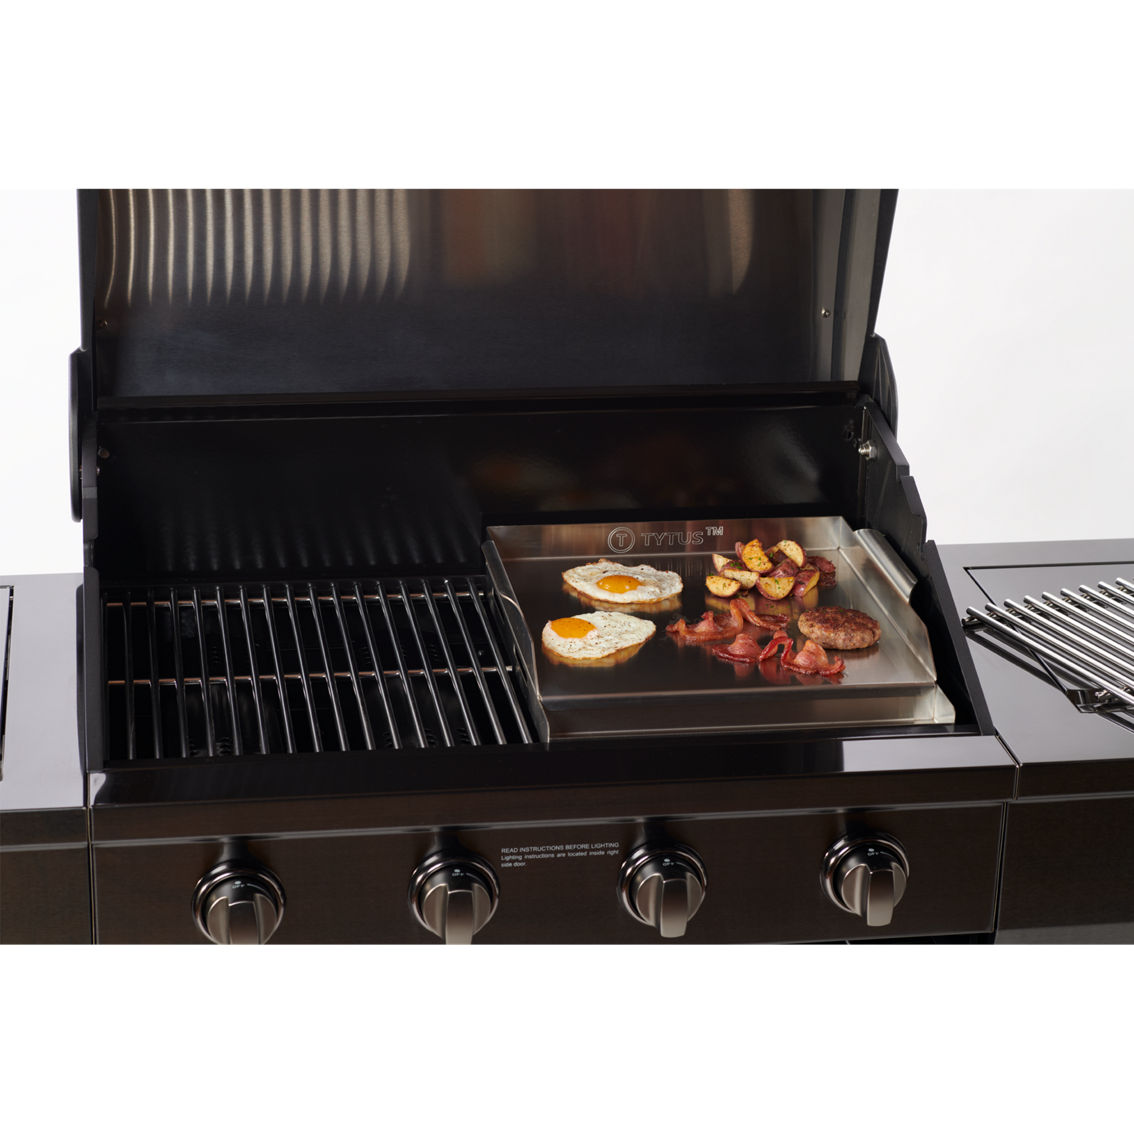 TYTUS Stainless Steel Griddle - Image 4 of 5